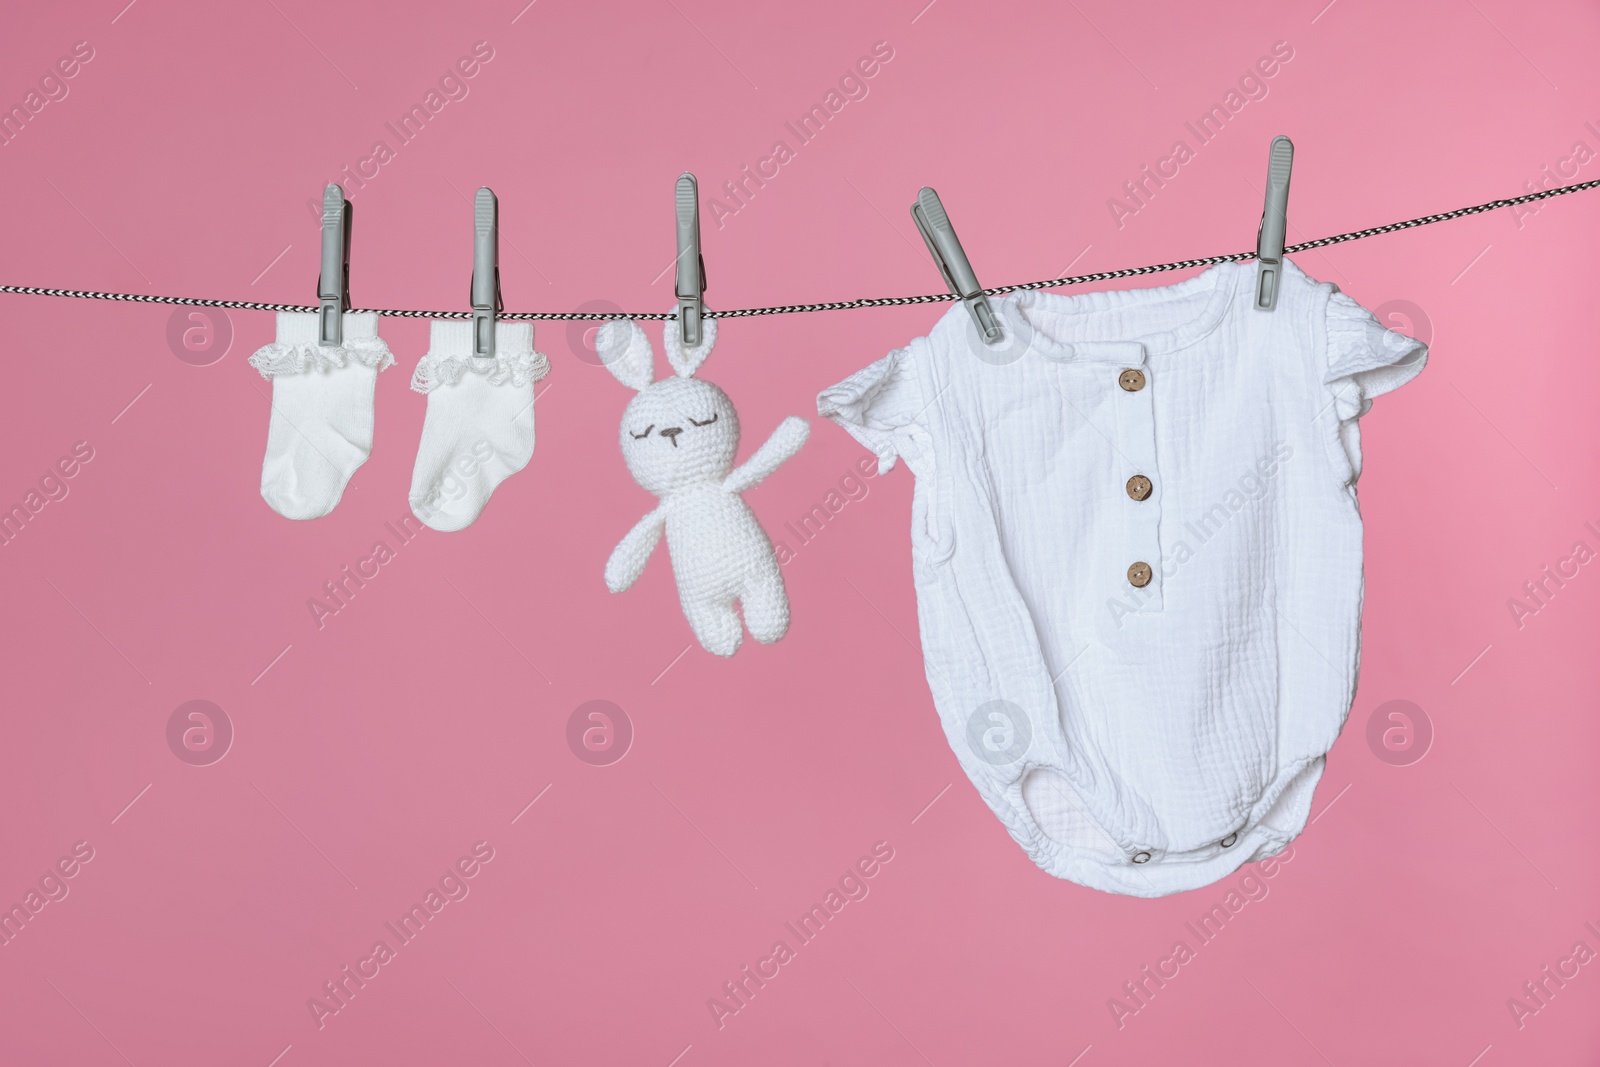 Photo of Different baby clothes and bunny toy drying on laundry line against pink background